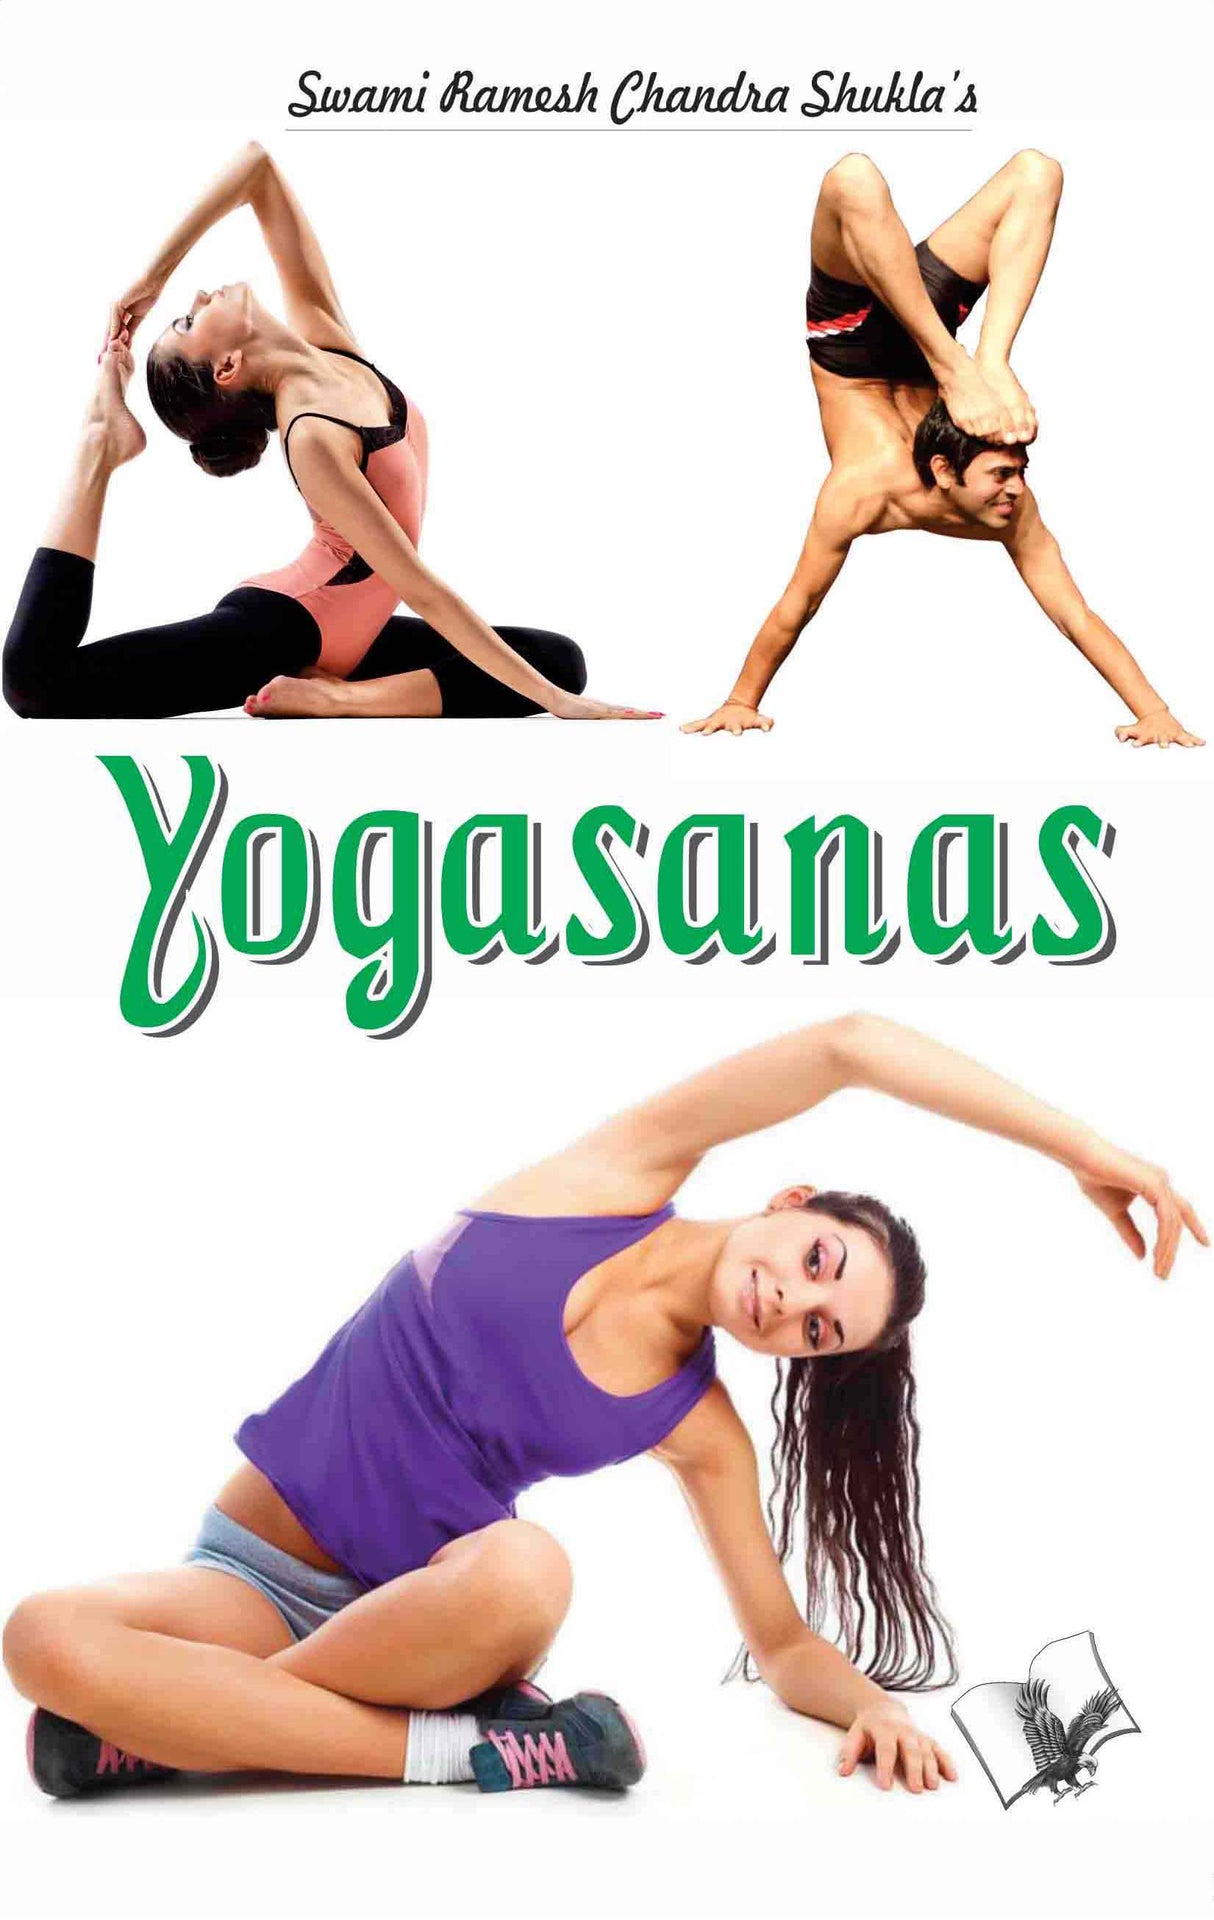 Yogasanas: Simple aasans that keep you fit and healthy